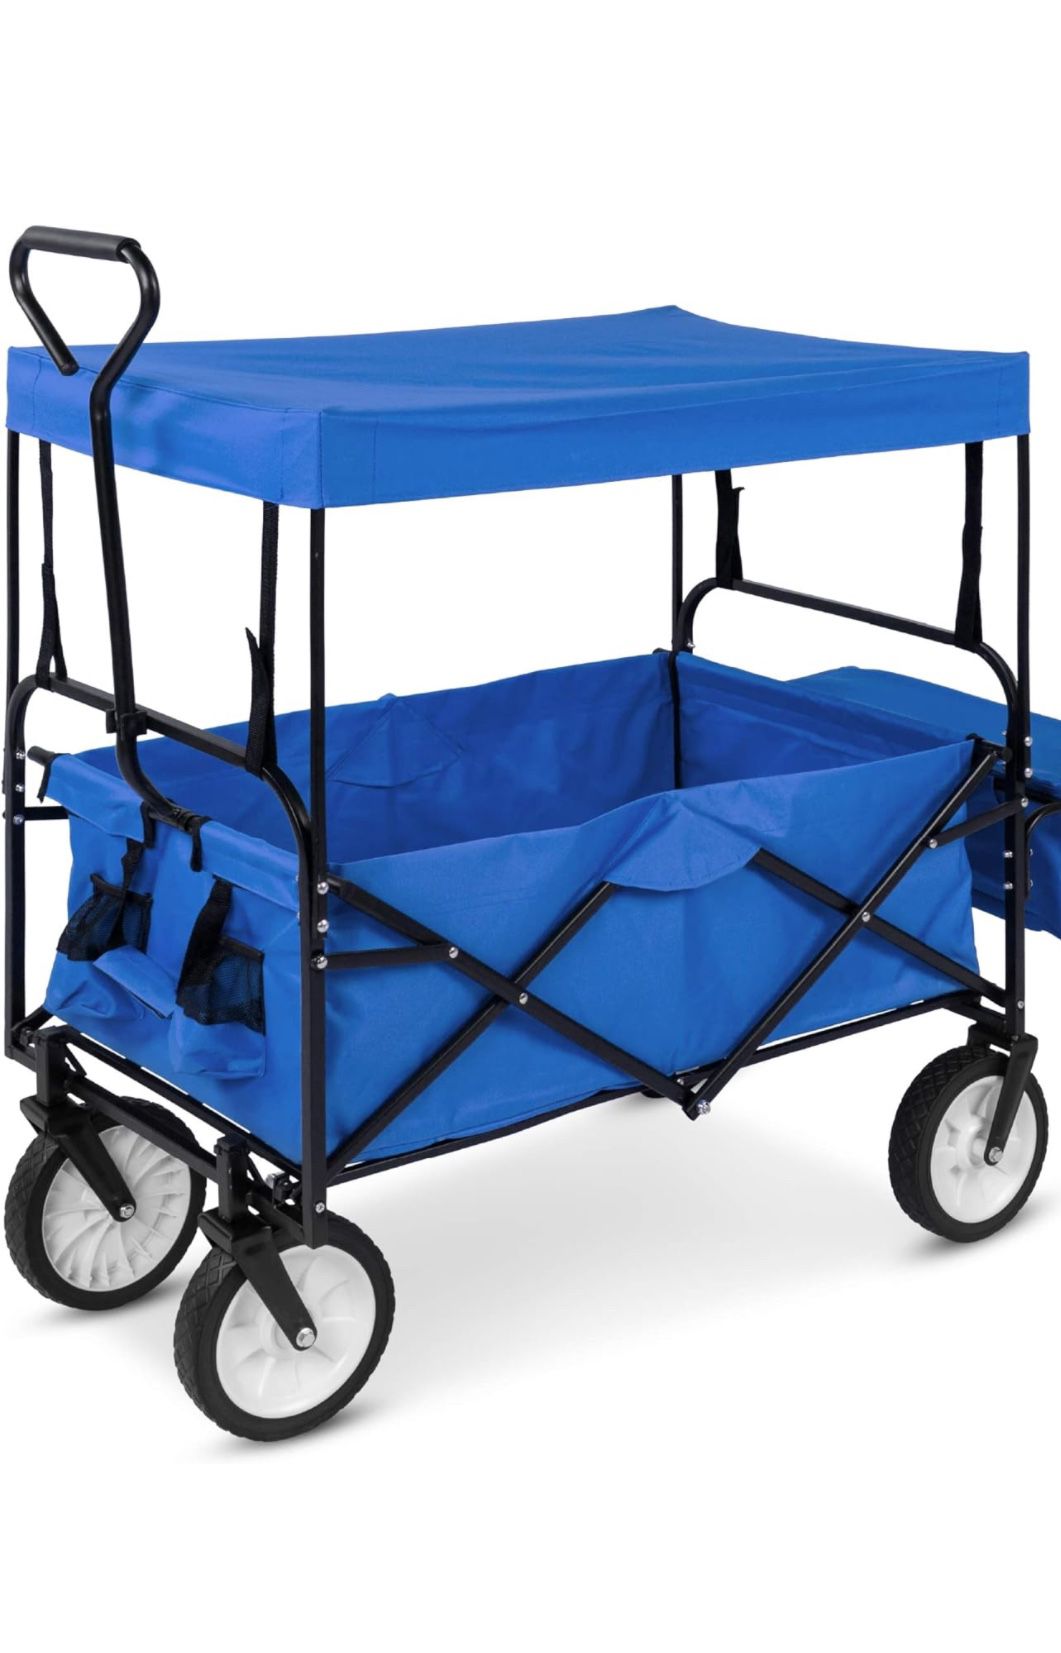 Folding Wagon With Canopy 